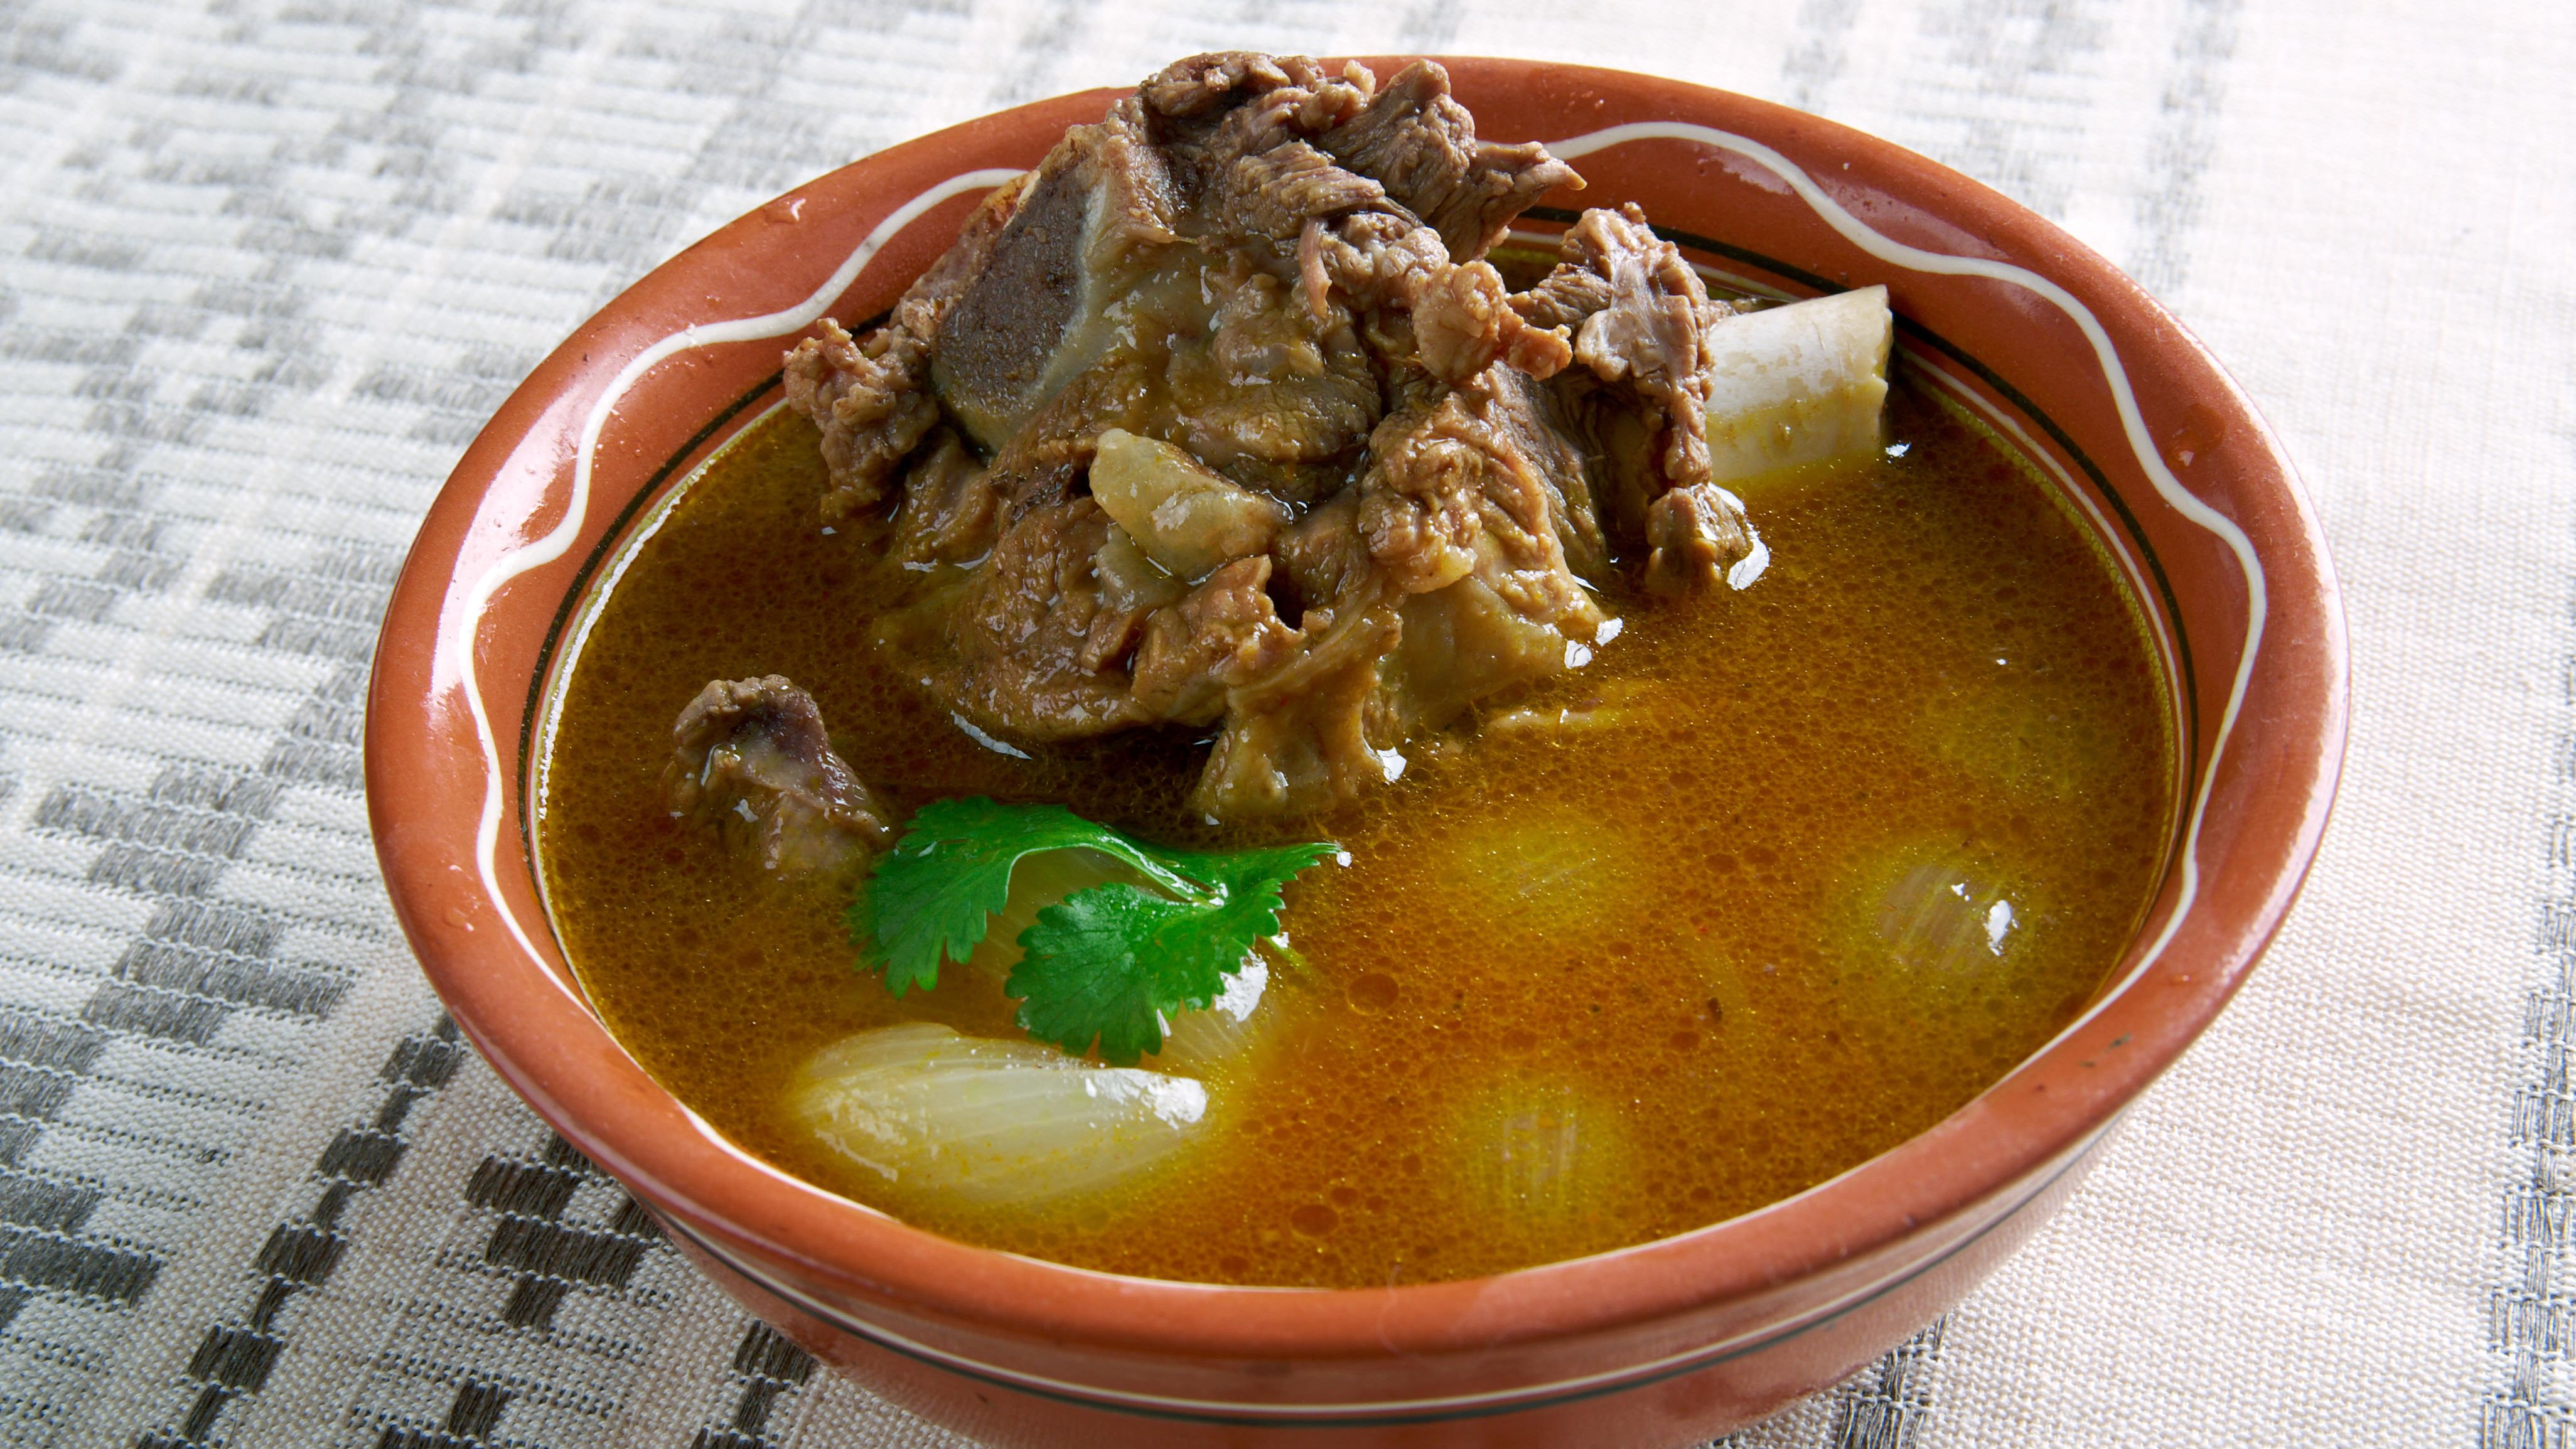 The paya is cooked over low heat so that the meat is tender.